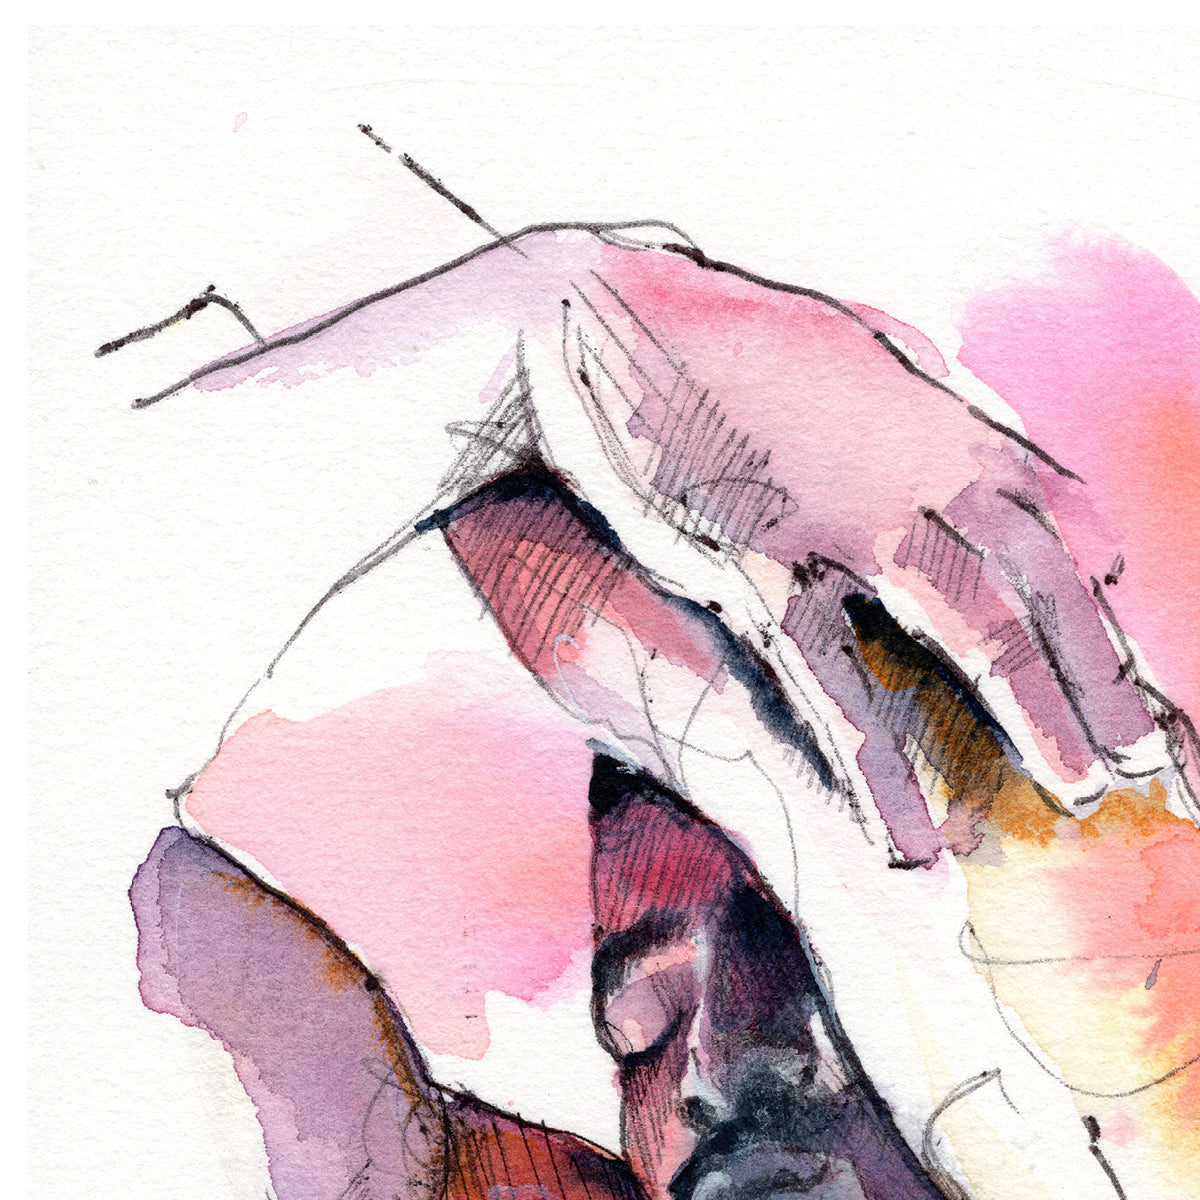 Male Figure with Vibrant Hues - 6x9" Original Watercolor Painting